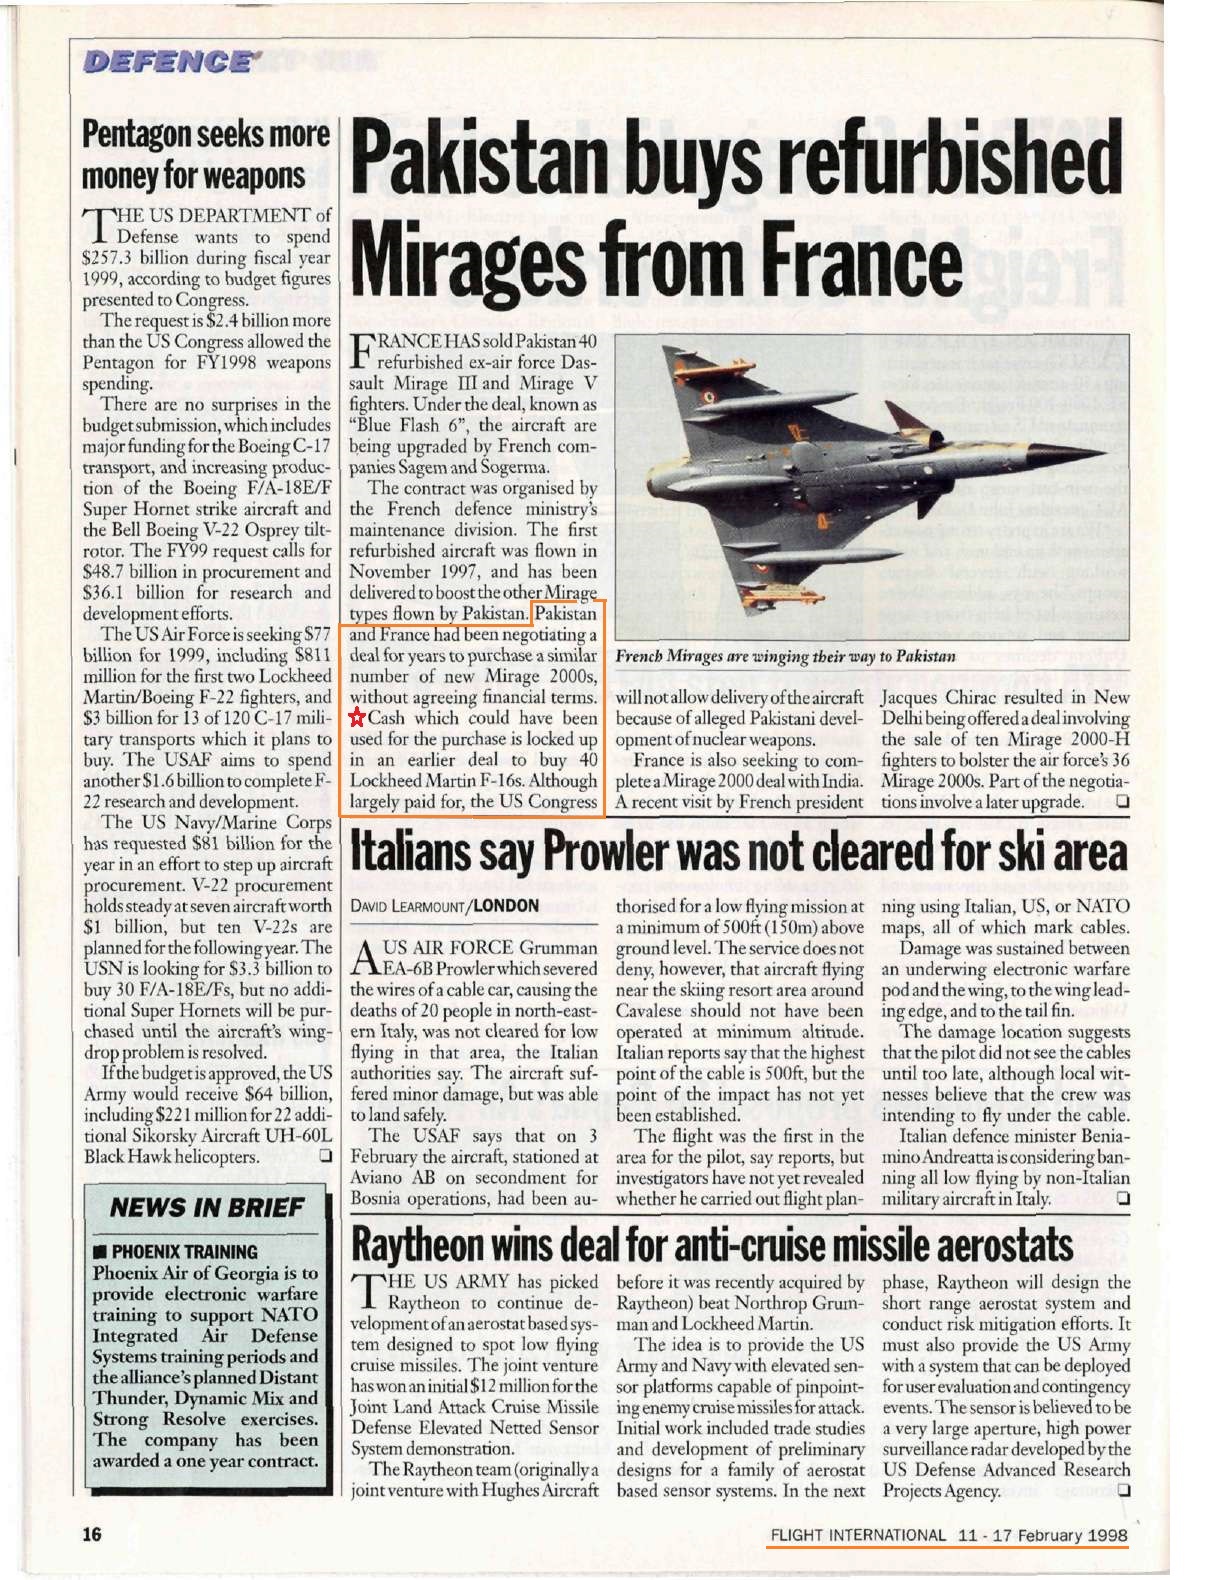 PAF Purchse Refurbished Mirage from France.jpg